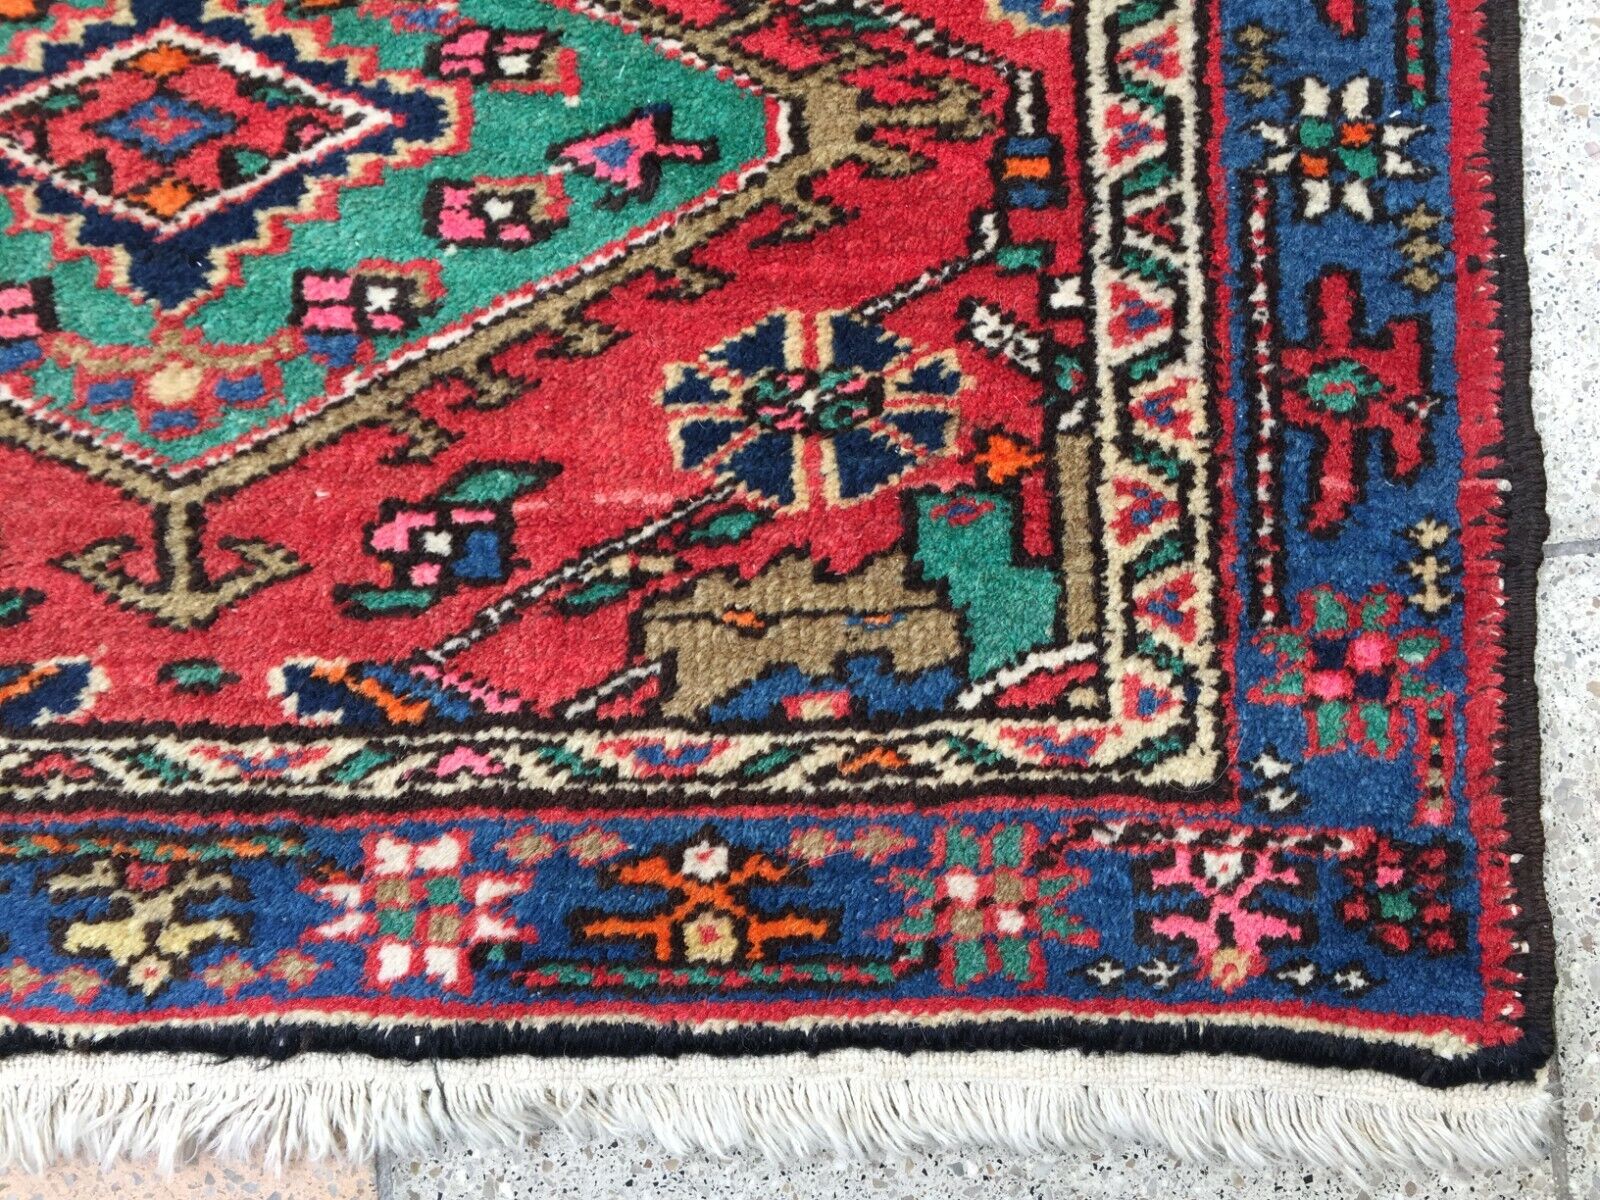 Dense Border with Complex Patterns Including Flowers on Handmade Hamadan Rug - 1960s